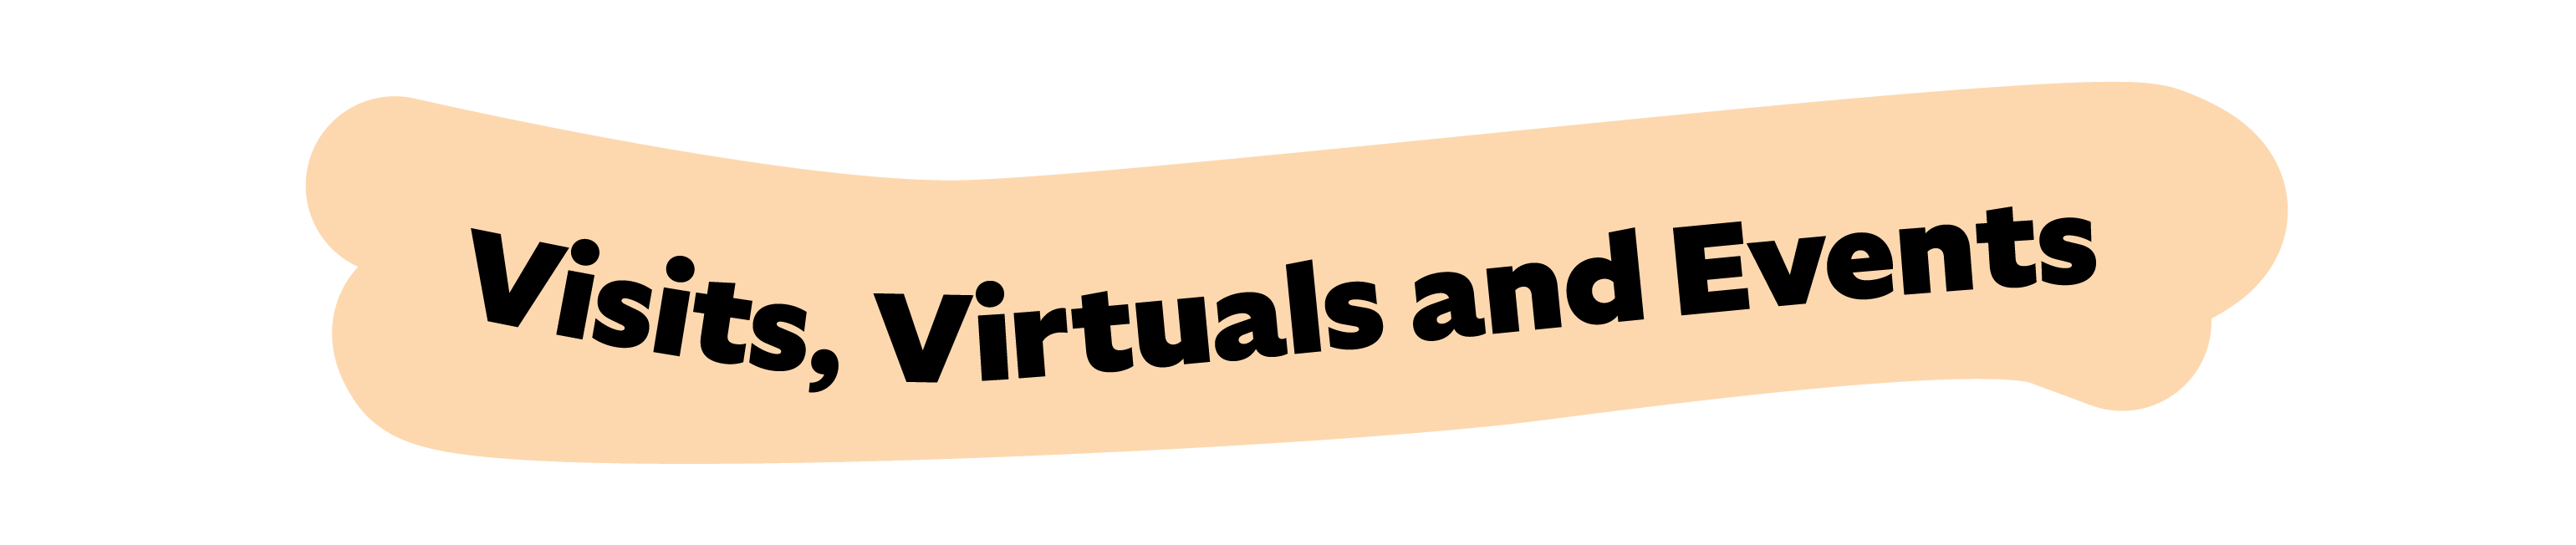 Visits, Virtuals and Events